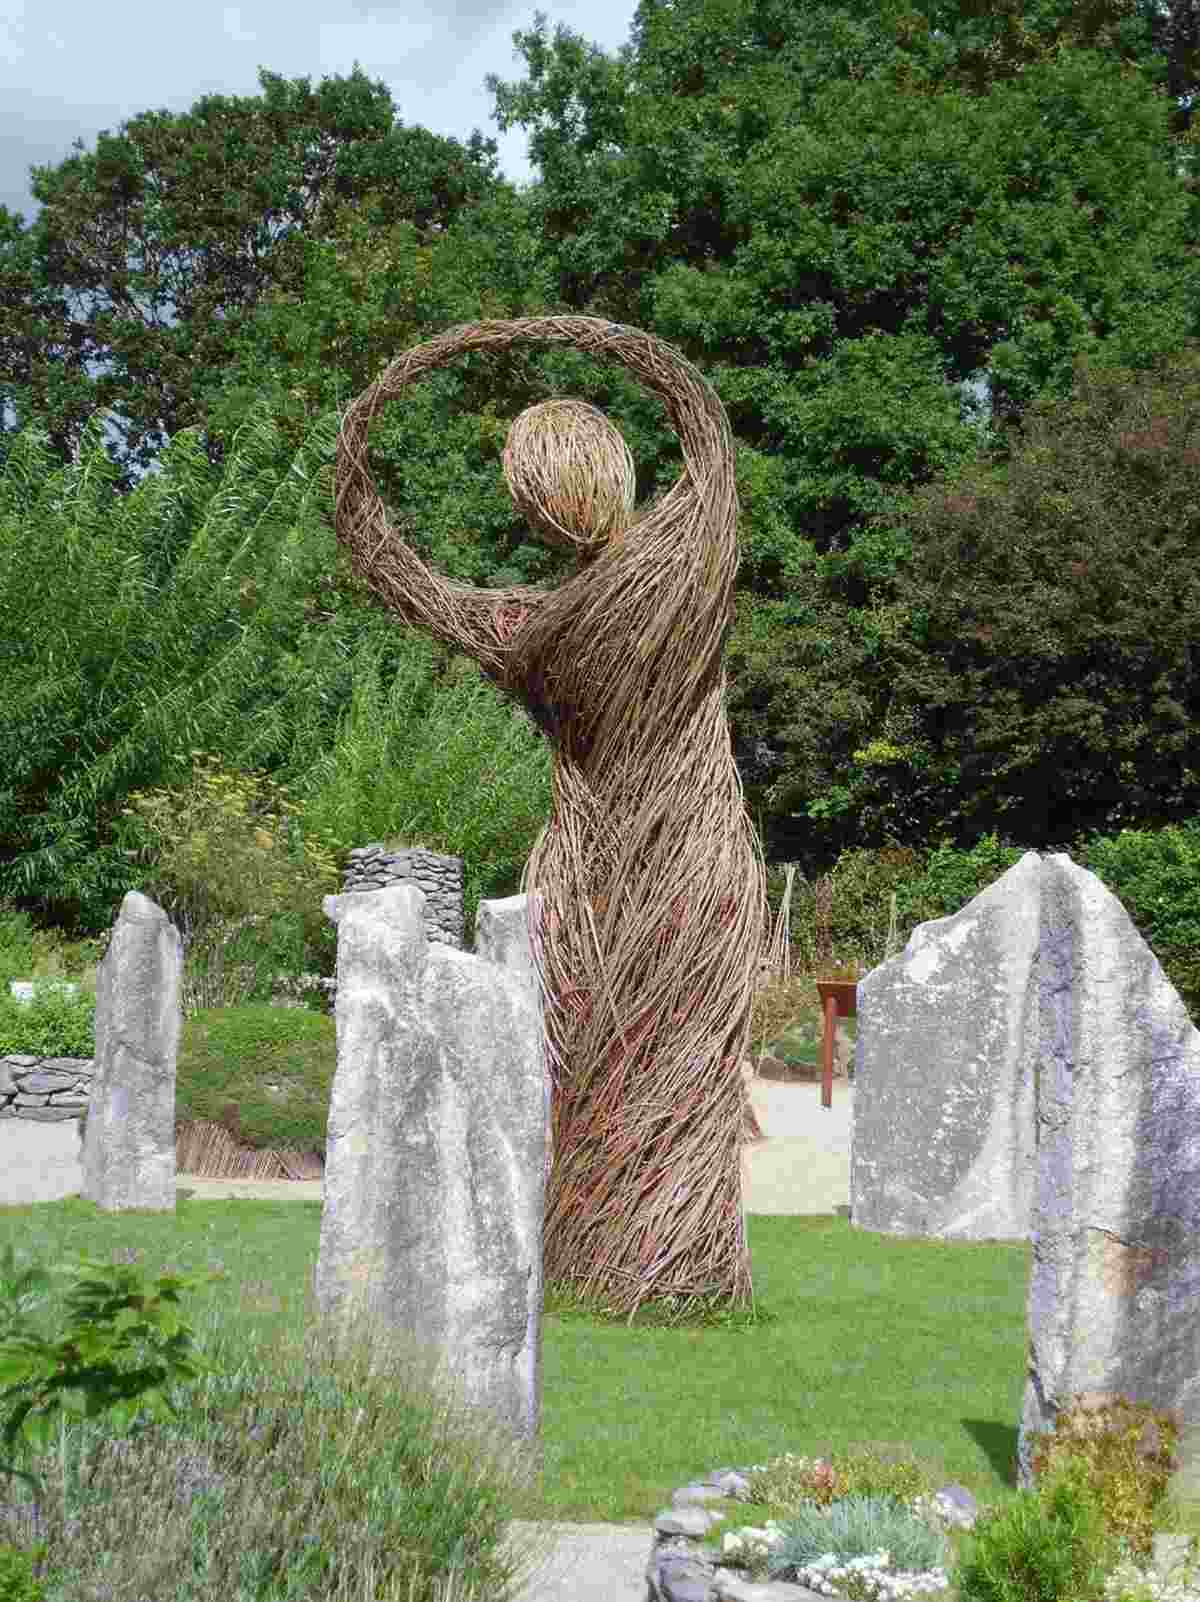 position a woman figure as a centerpiece in the garden next to stones